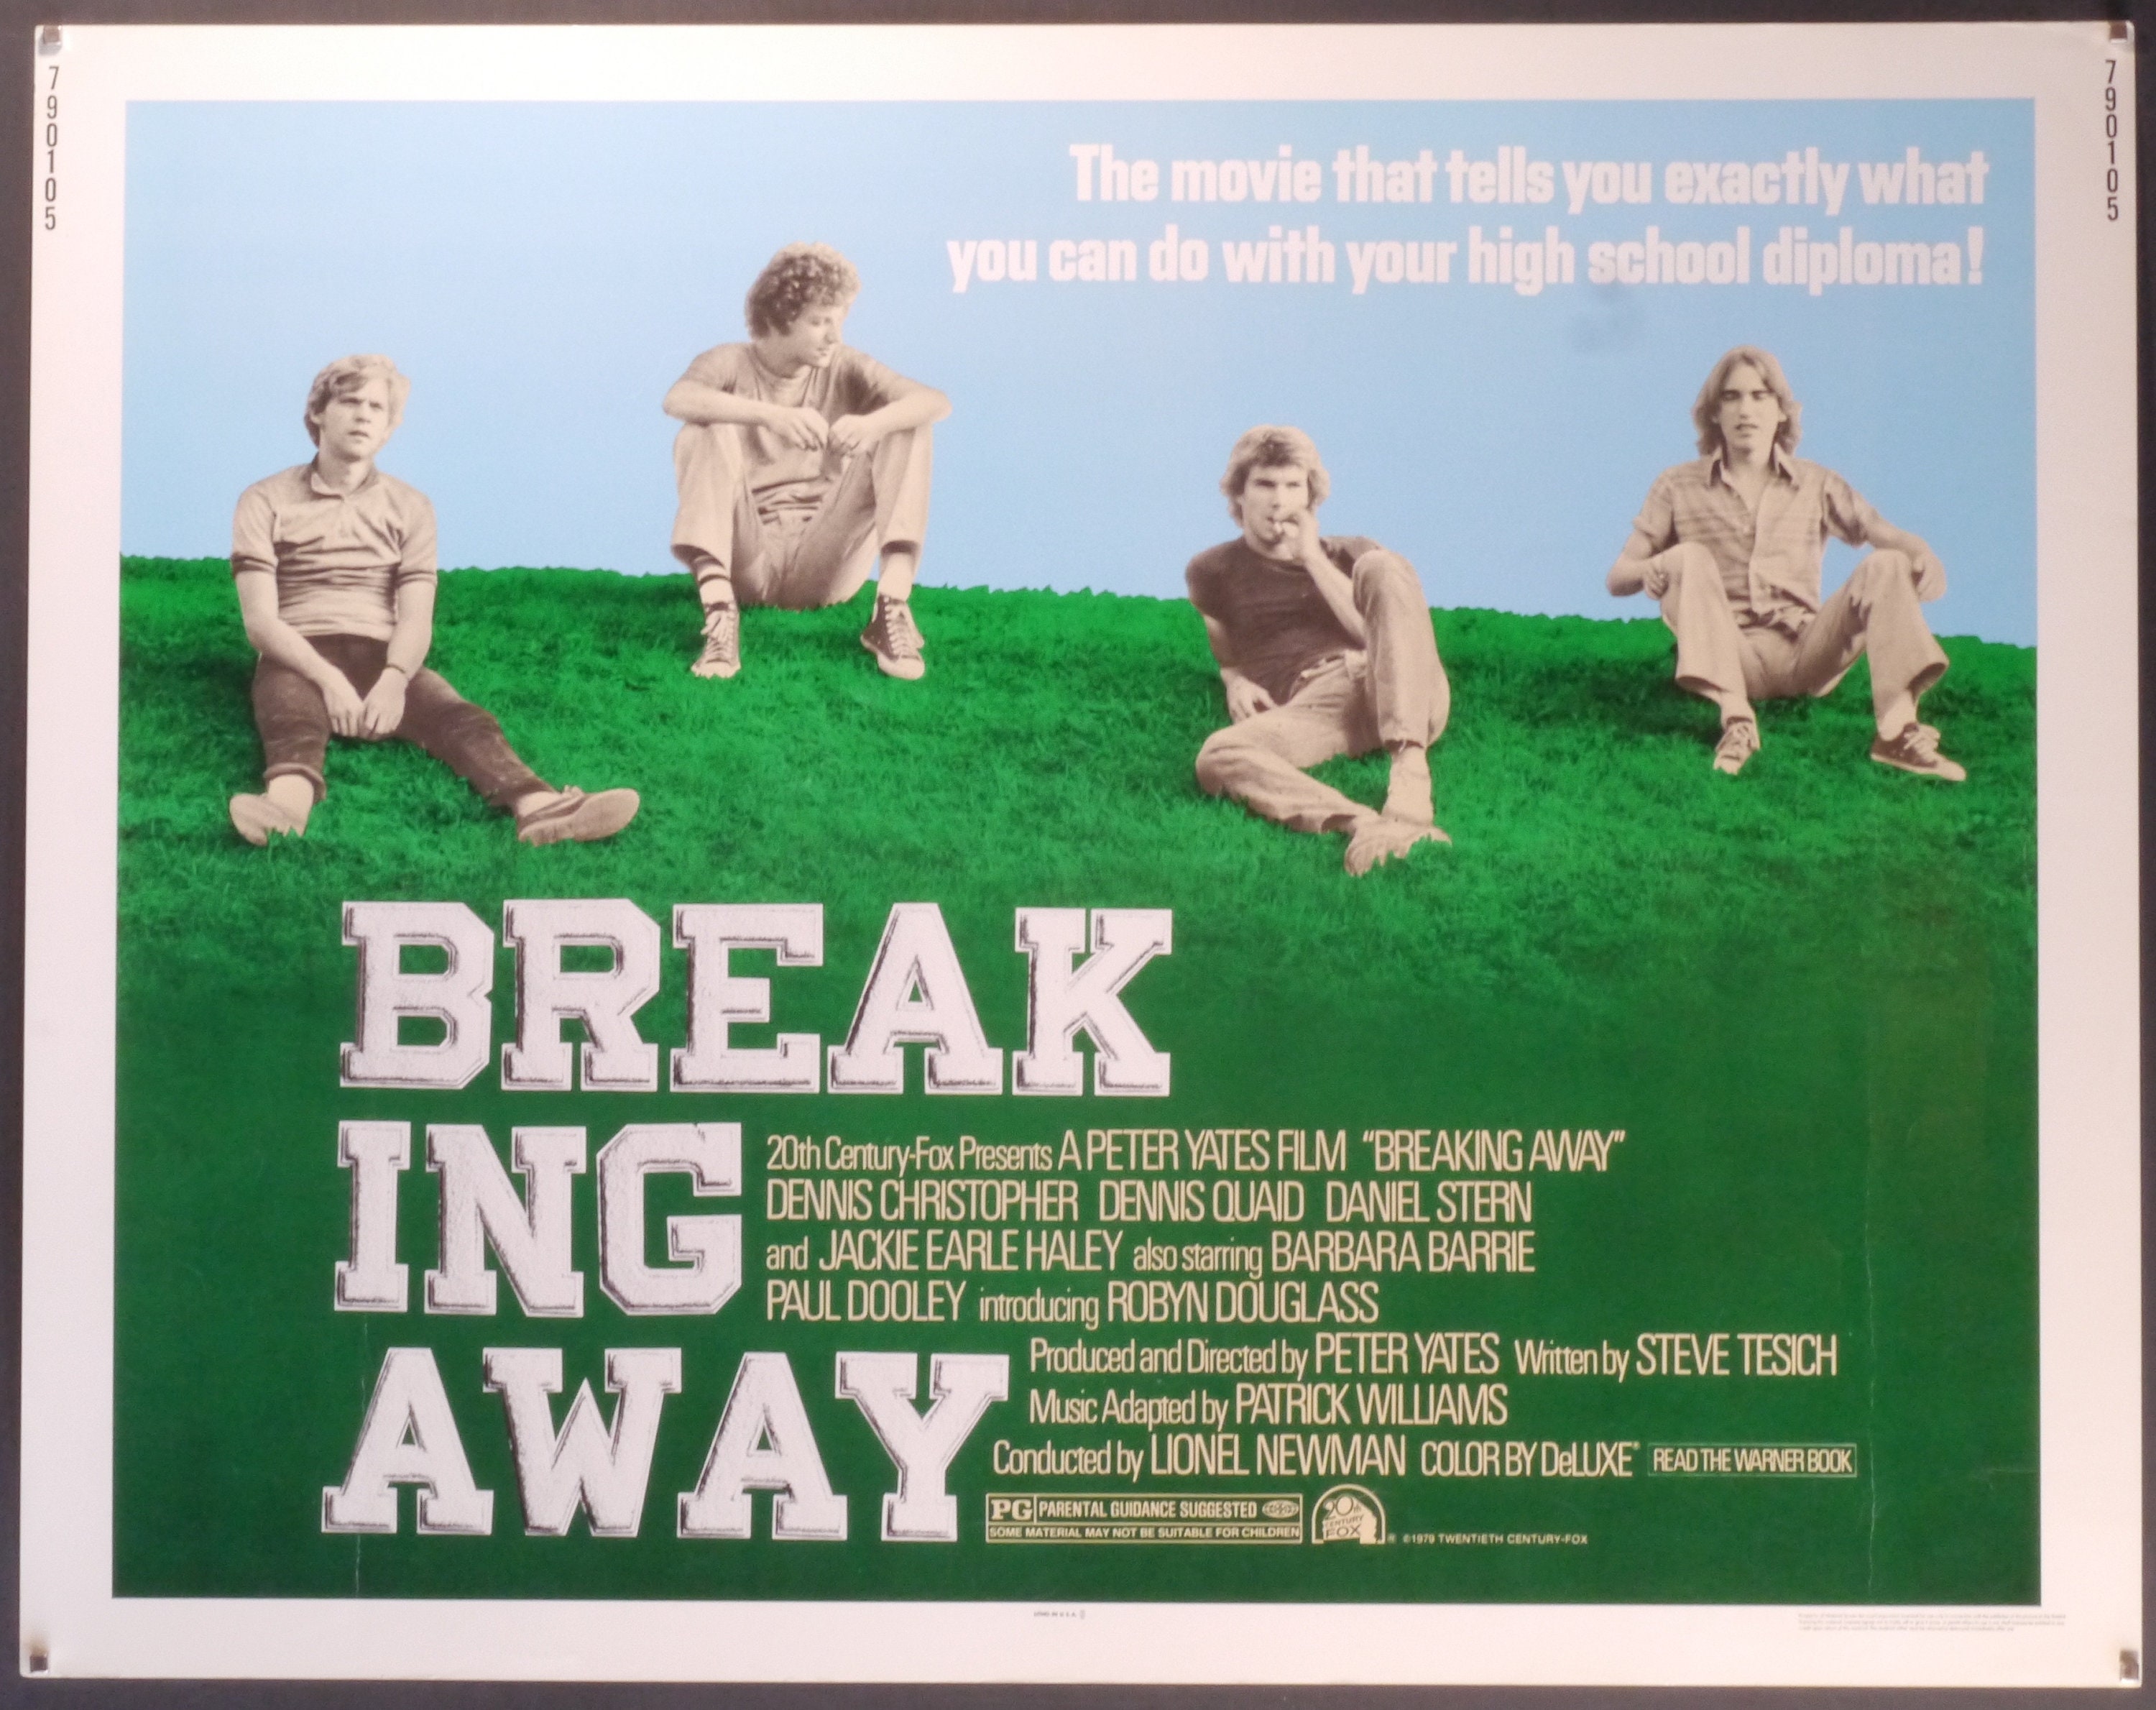 Breaking Away-original Vintage Movie Poster for the Peter image pic